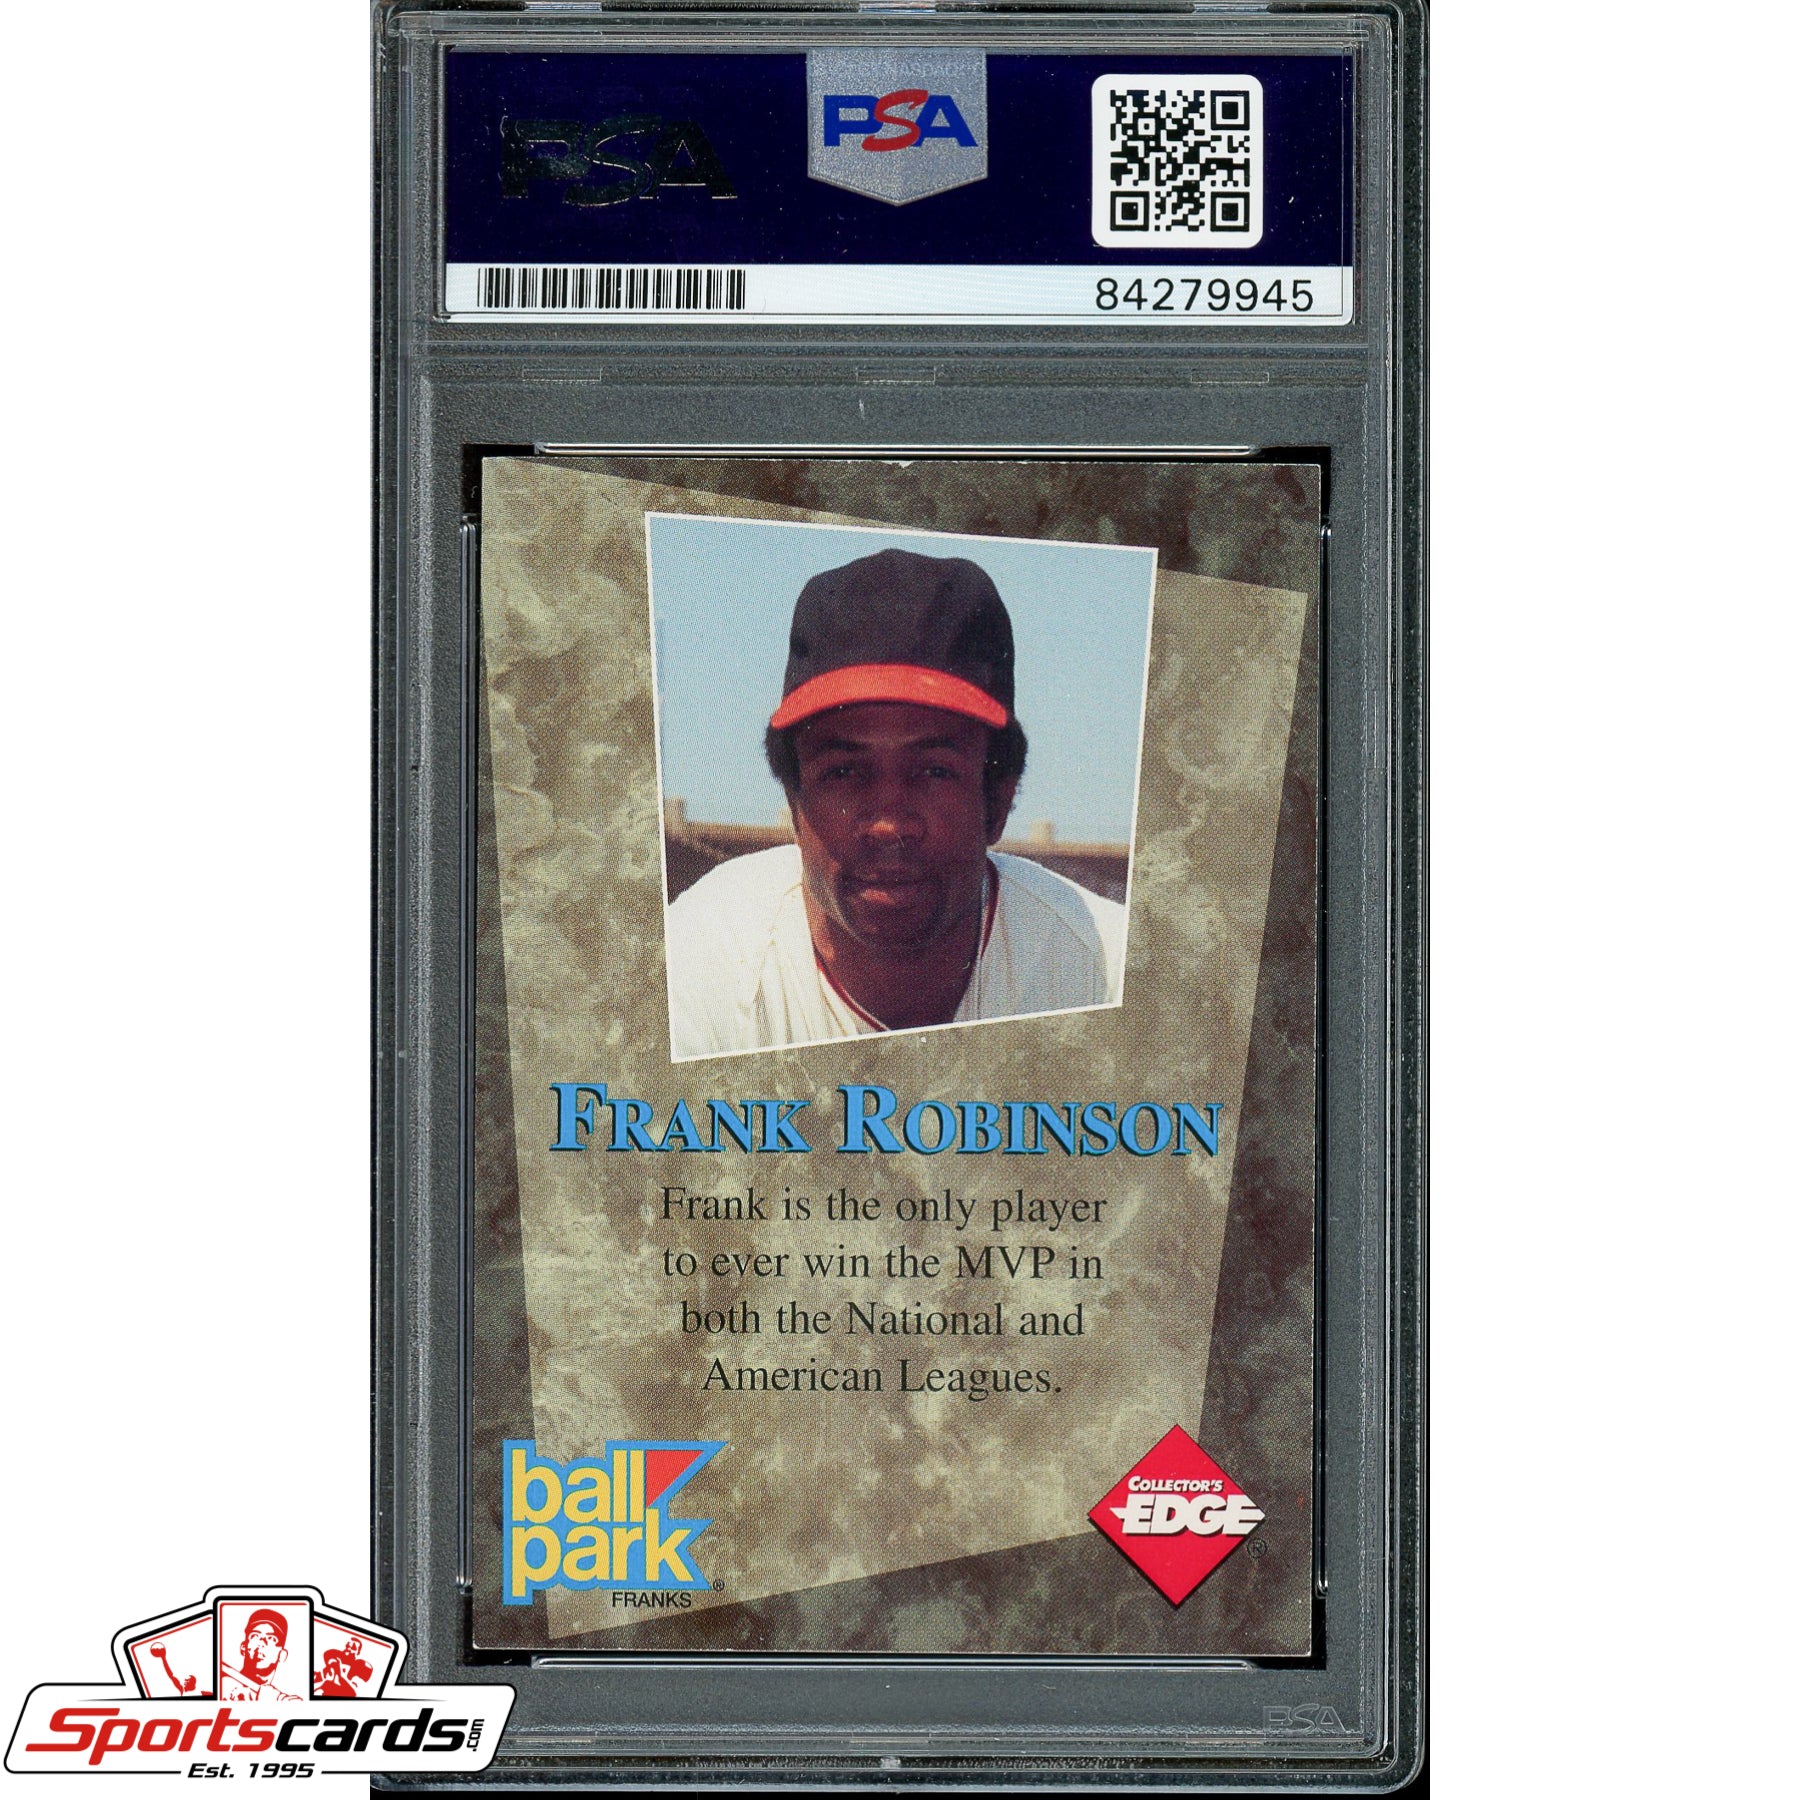 Frank Robinson Signed Autographed Collector's Edge Ball Park Card PSA/DNA